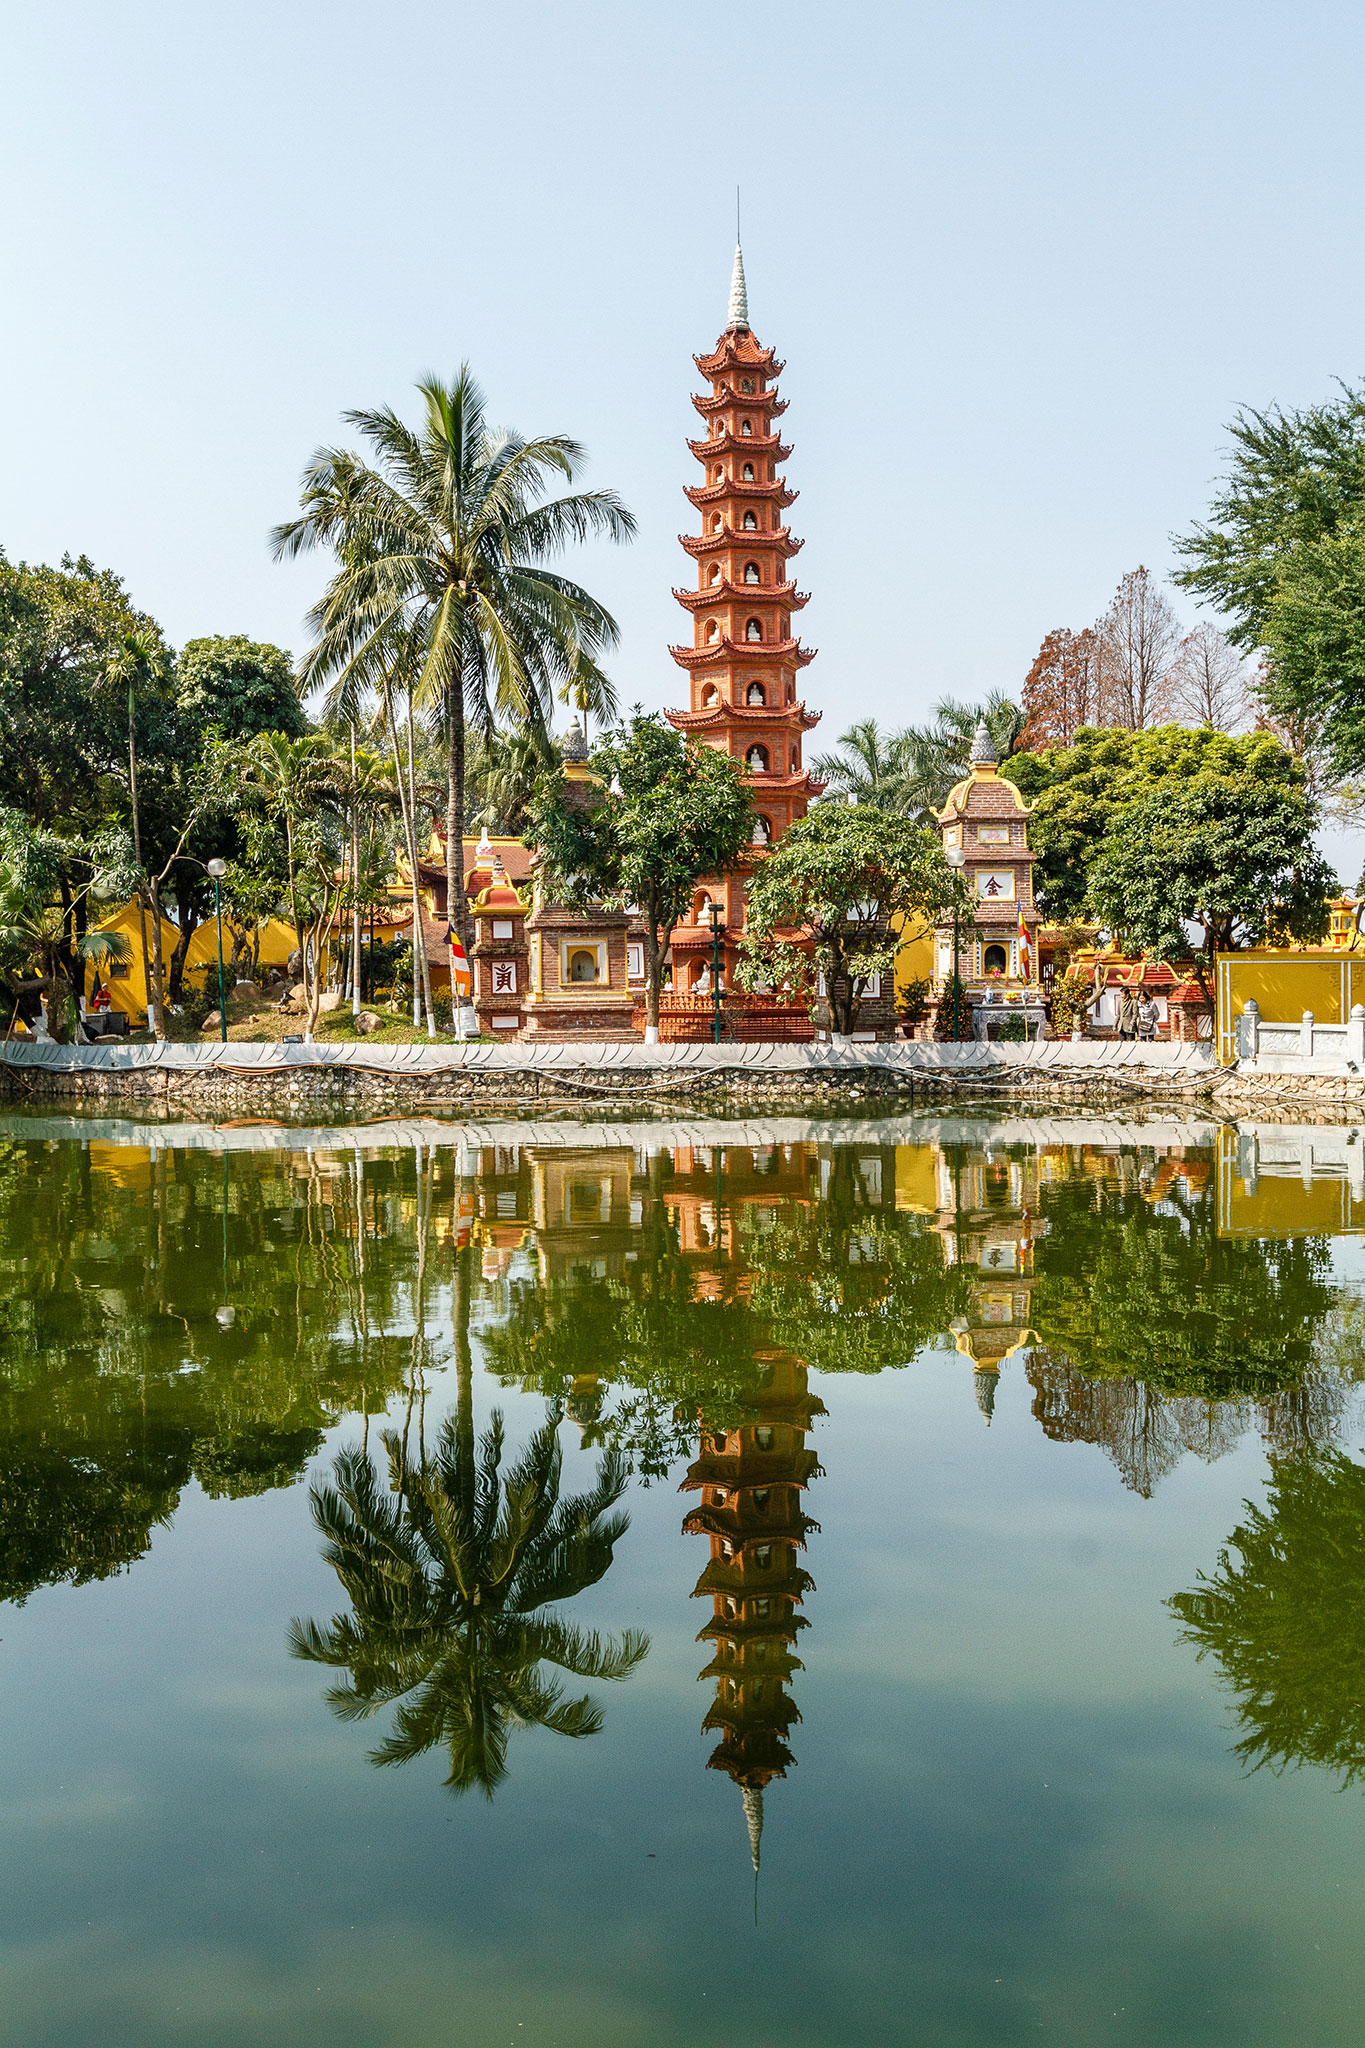 Tran Quoc Pagoda. (Photo: National Geographic)